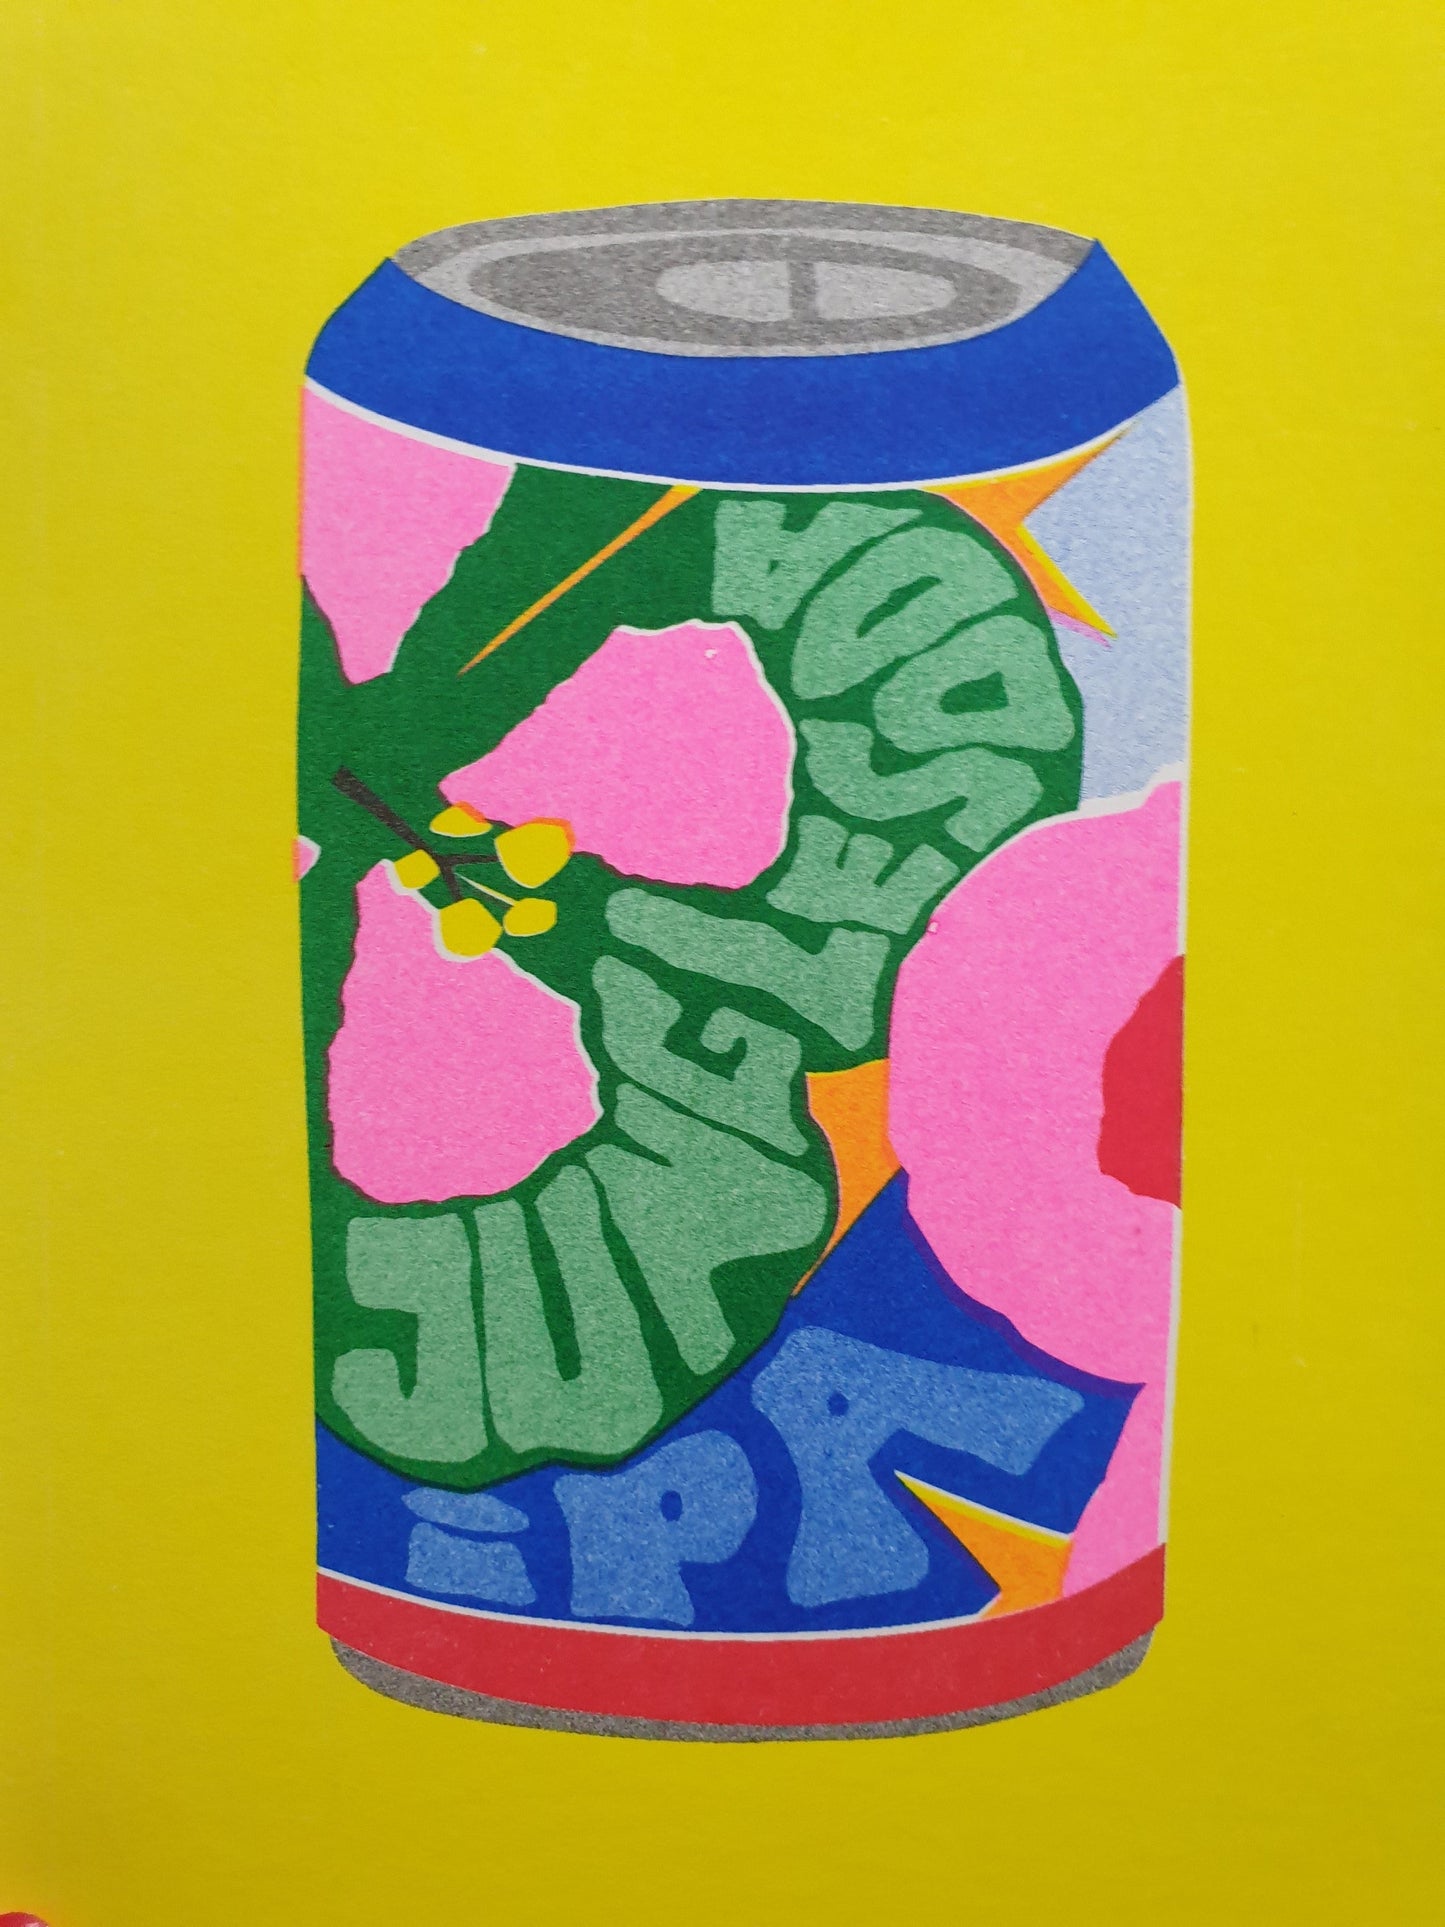 'A can of jungle soda' -  risograph print by 'We are out of office'